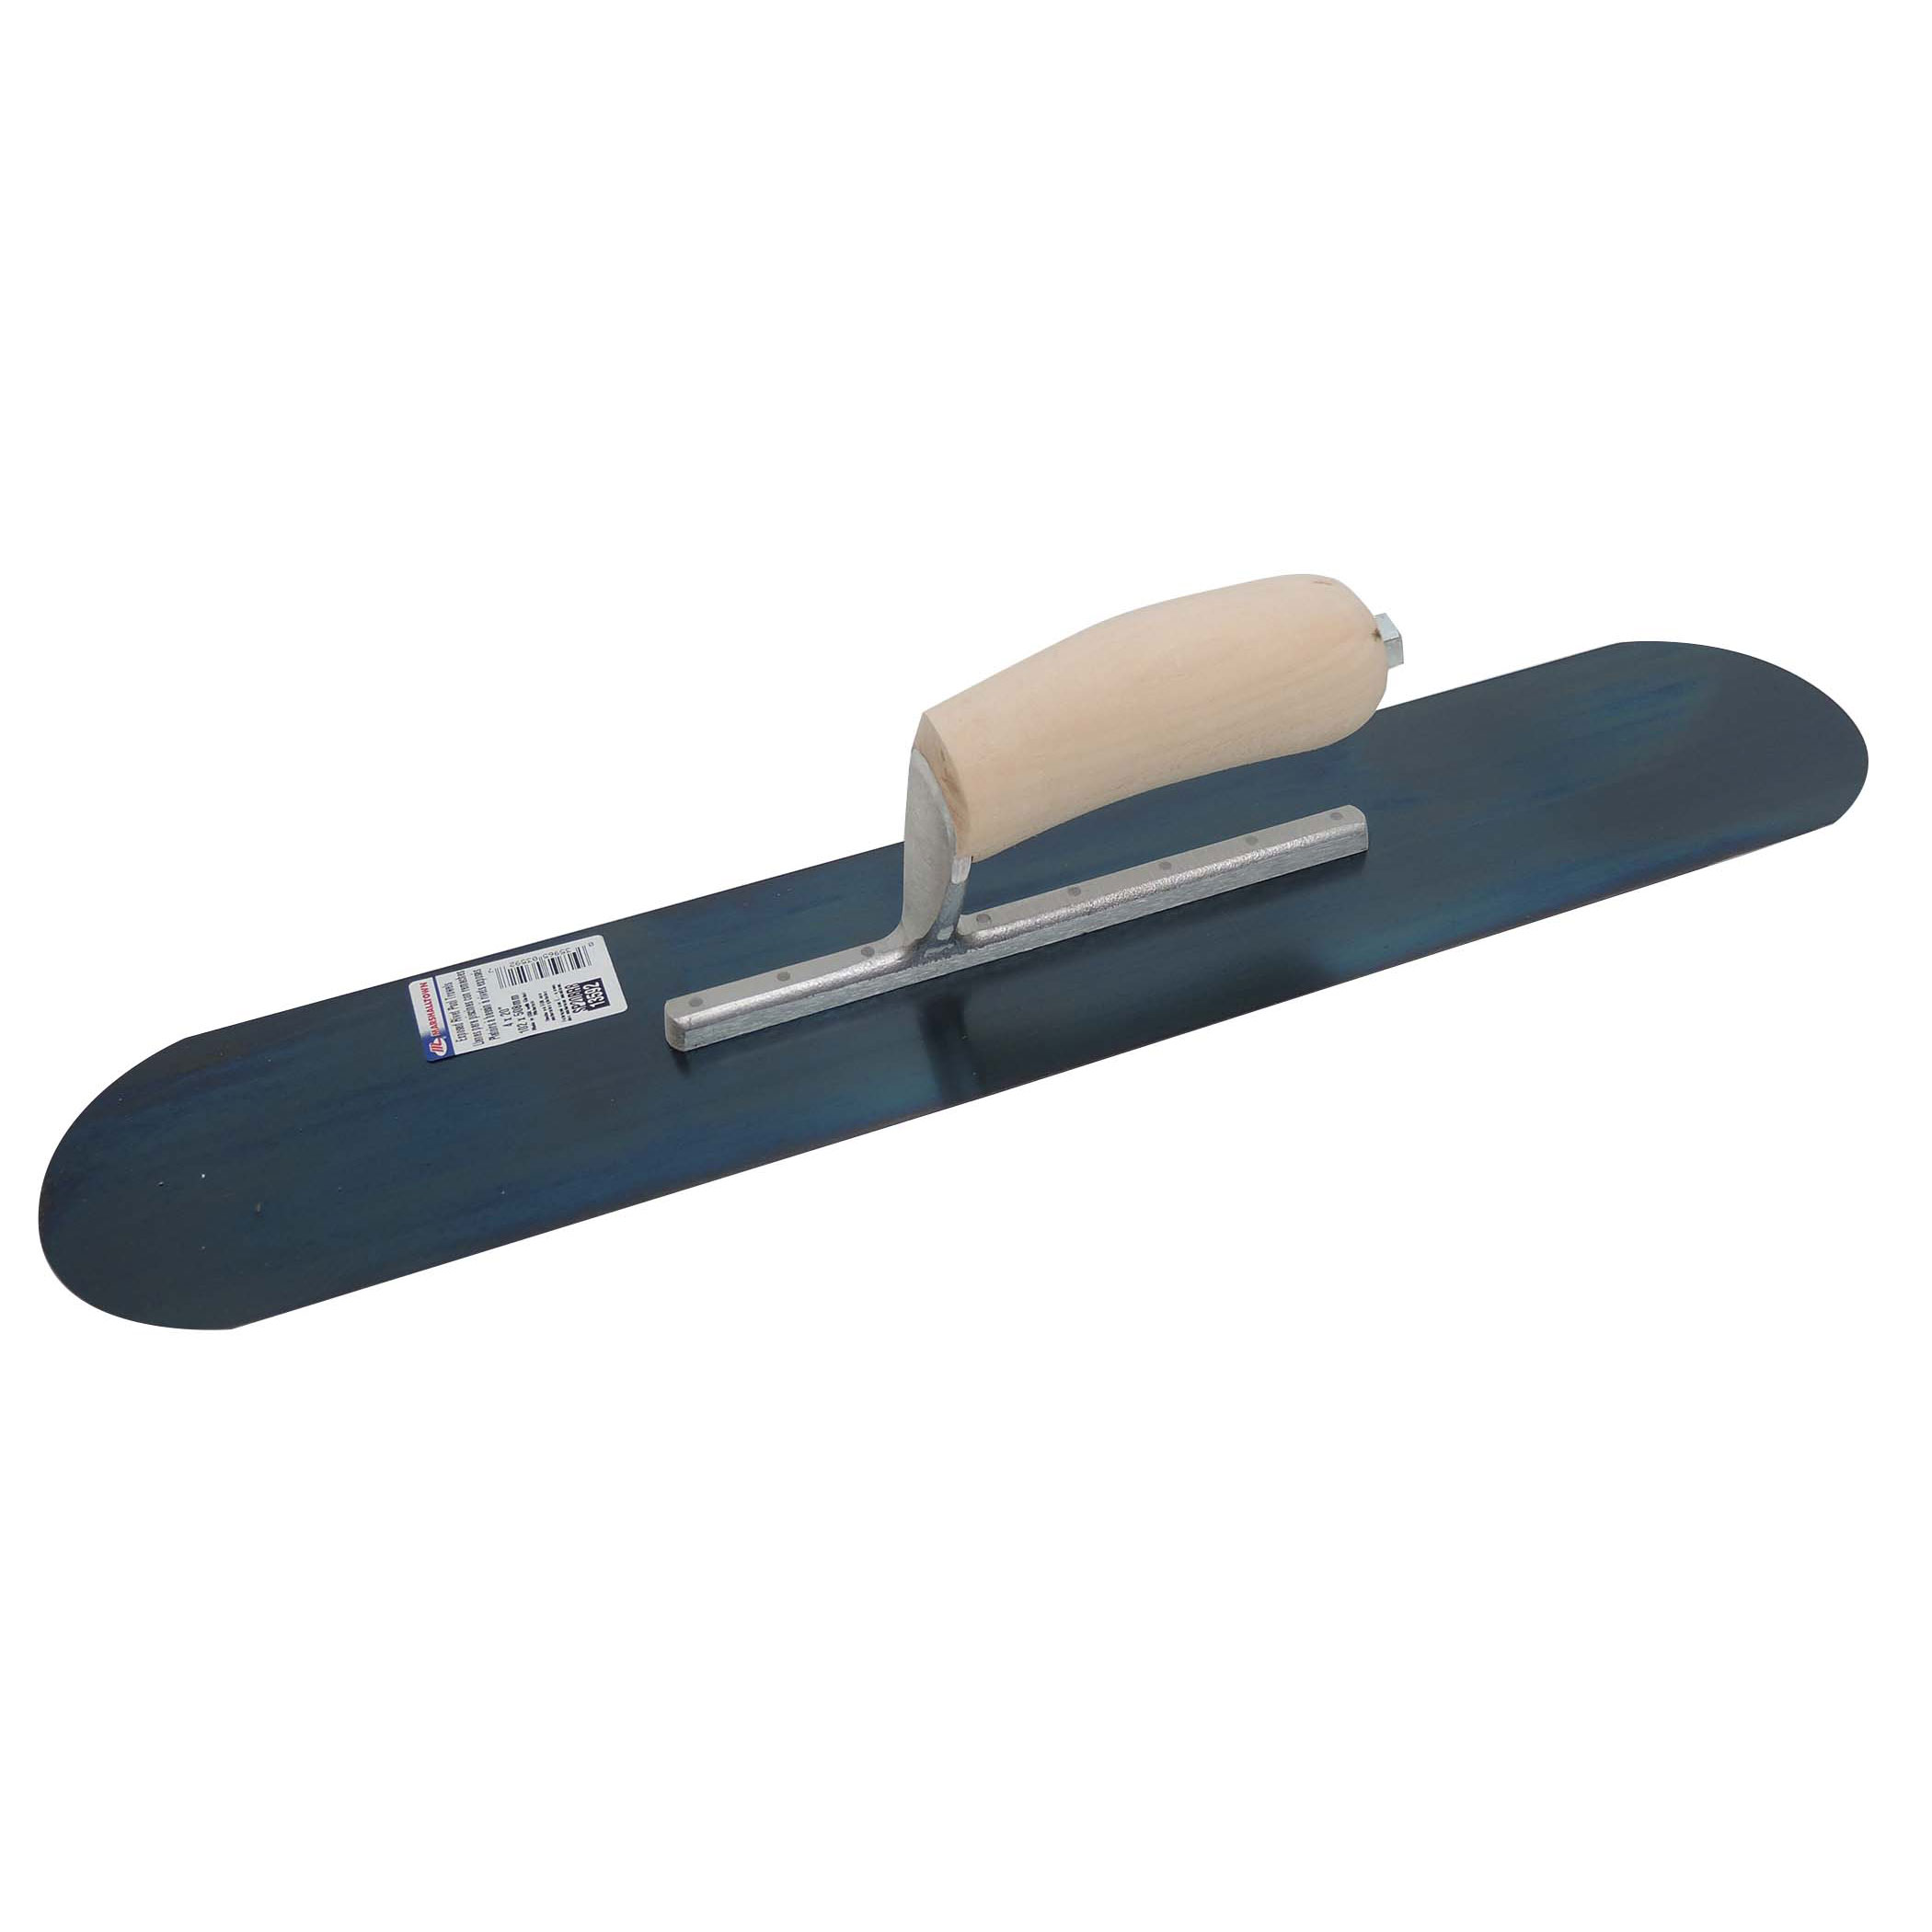 Marshalltown SP20BR8 20in x 4in Fully Rounded Trowel with Exposed Rivet Trowels and Wood Handle SP20BR8